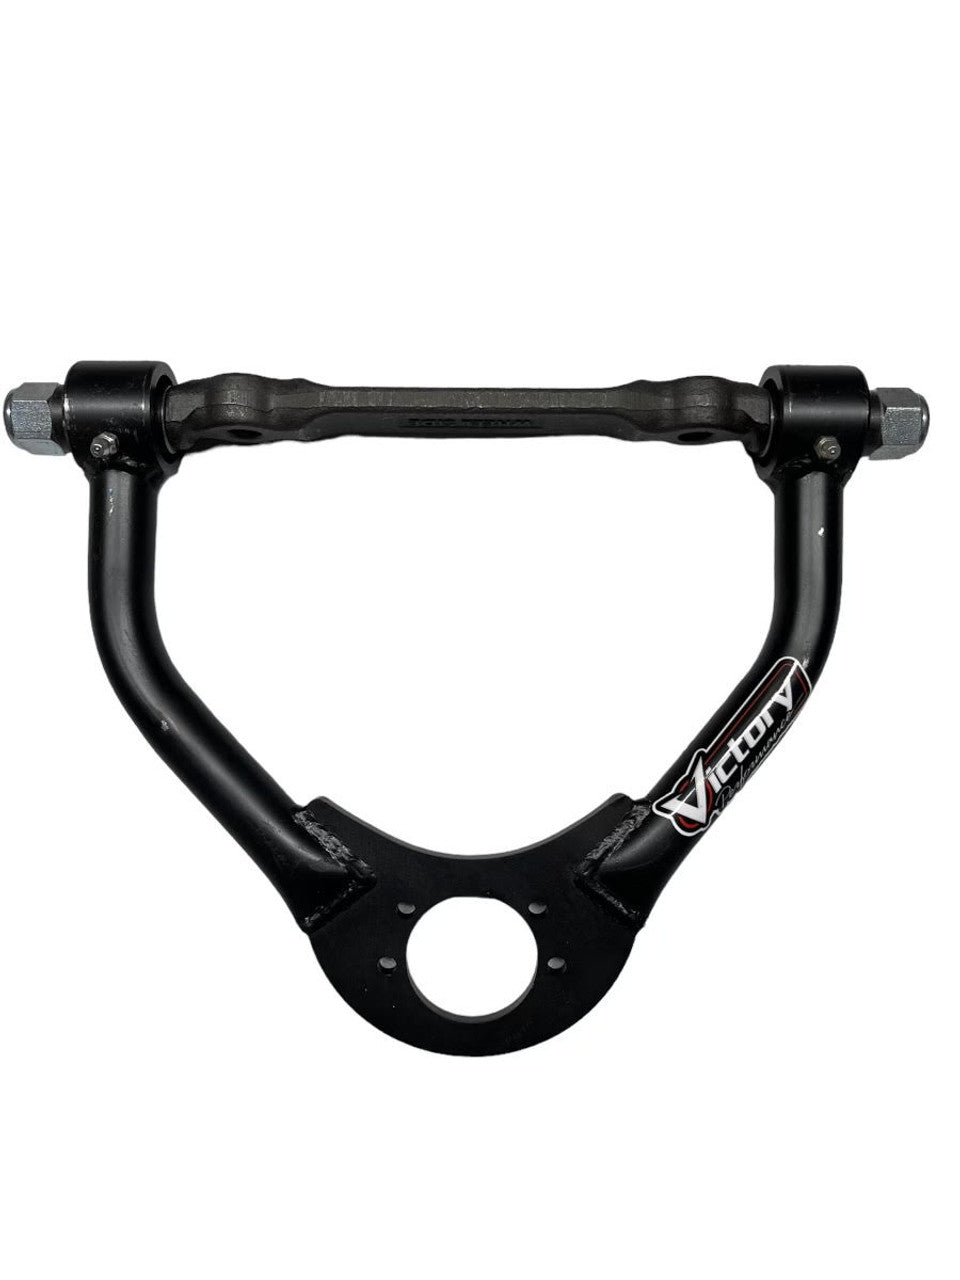 Upper Control Arms Metric IMPROVED GEO STYLE